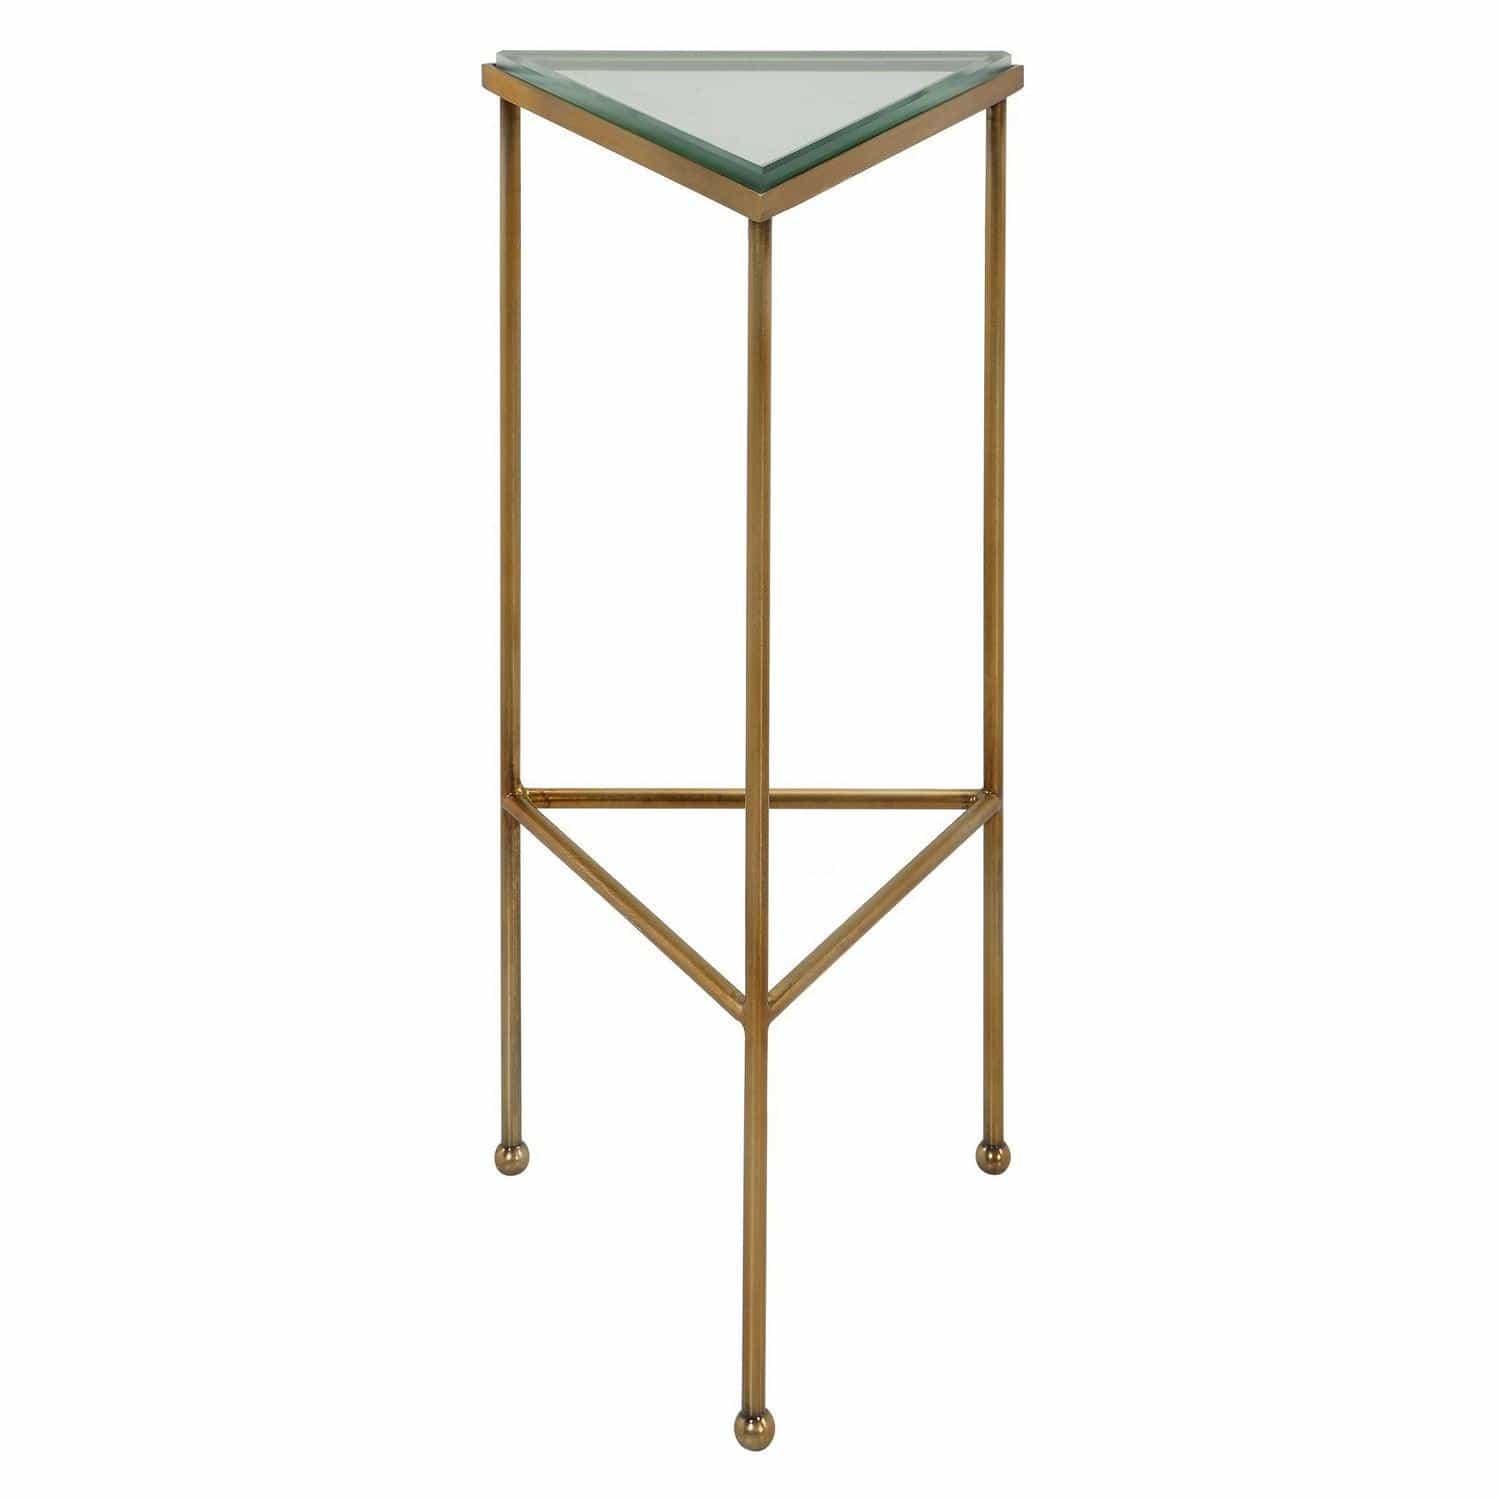 The Uttermost - Giza Drink Table - 25209 | Montreal Lighting & Hardware